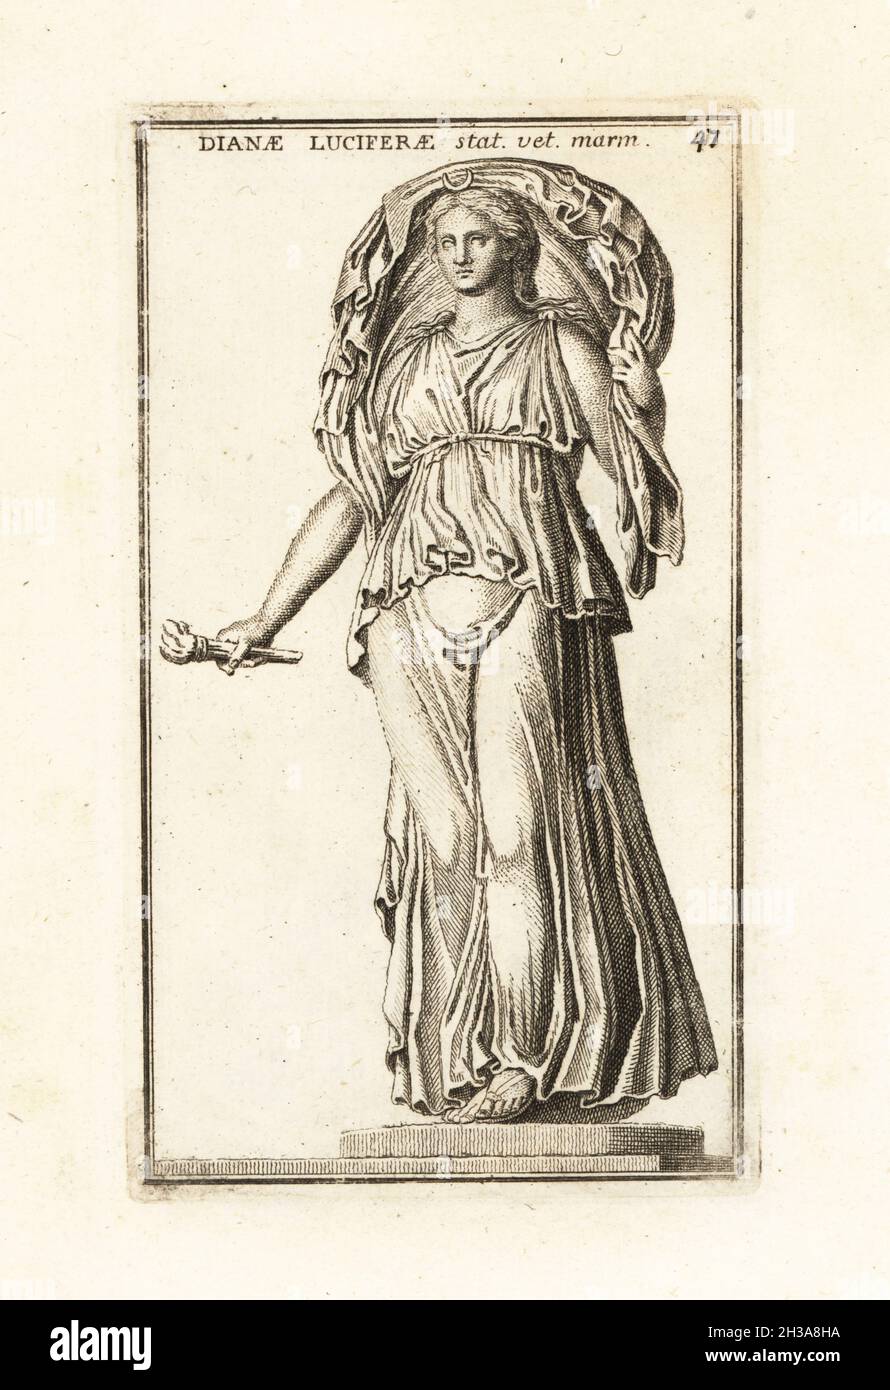 Statue of Roman moon goddess Luna holding a torch, wearing a billowing chiton, a crescent moon in her hair. Roman copy of a 4th century BC Greek statue of Selene. Also known as Diana Lucifera. Dianae Luciferae statua vetus marmorea. Copperplate engraving by Giovanni Battista Cannetti from Copperplates of the most beautiful ancient statues of Rome, Calcografia di piu belle statue antiche a Roma, engraved by Cannetti all'Arco della Ciambella, published by Gaetano Quojani, Rome, 1779. Stock Photo